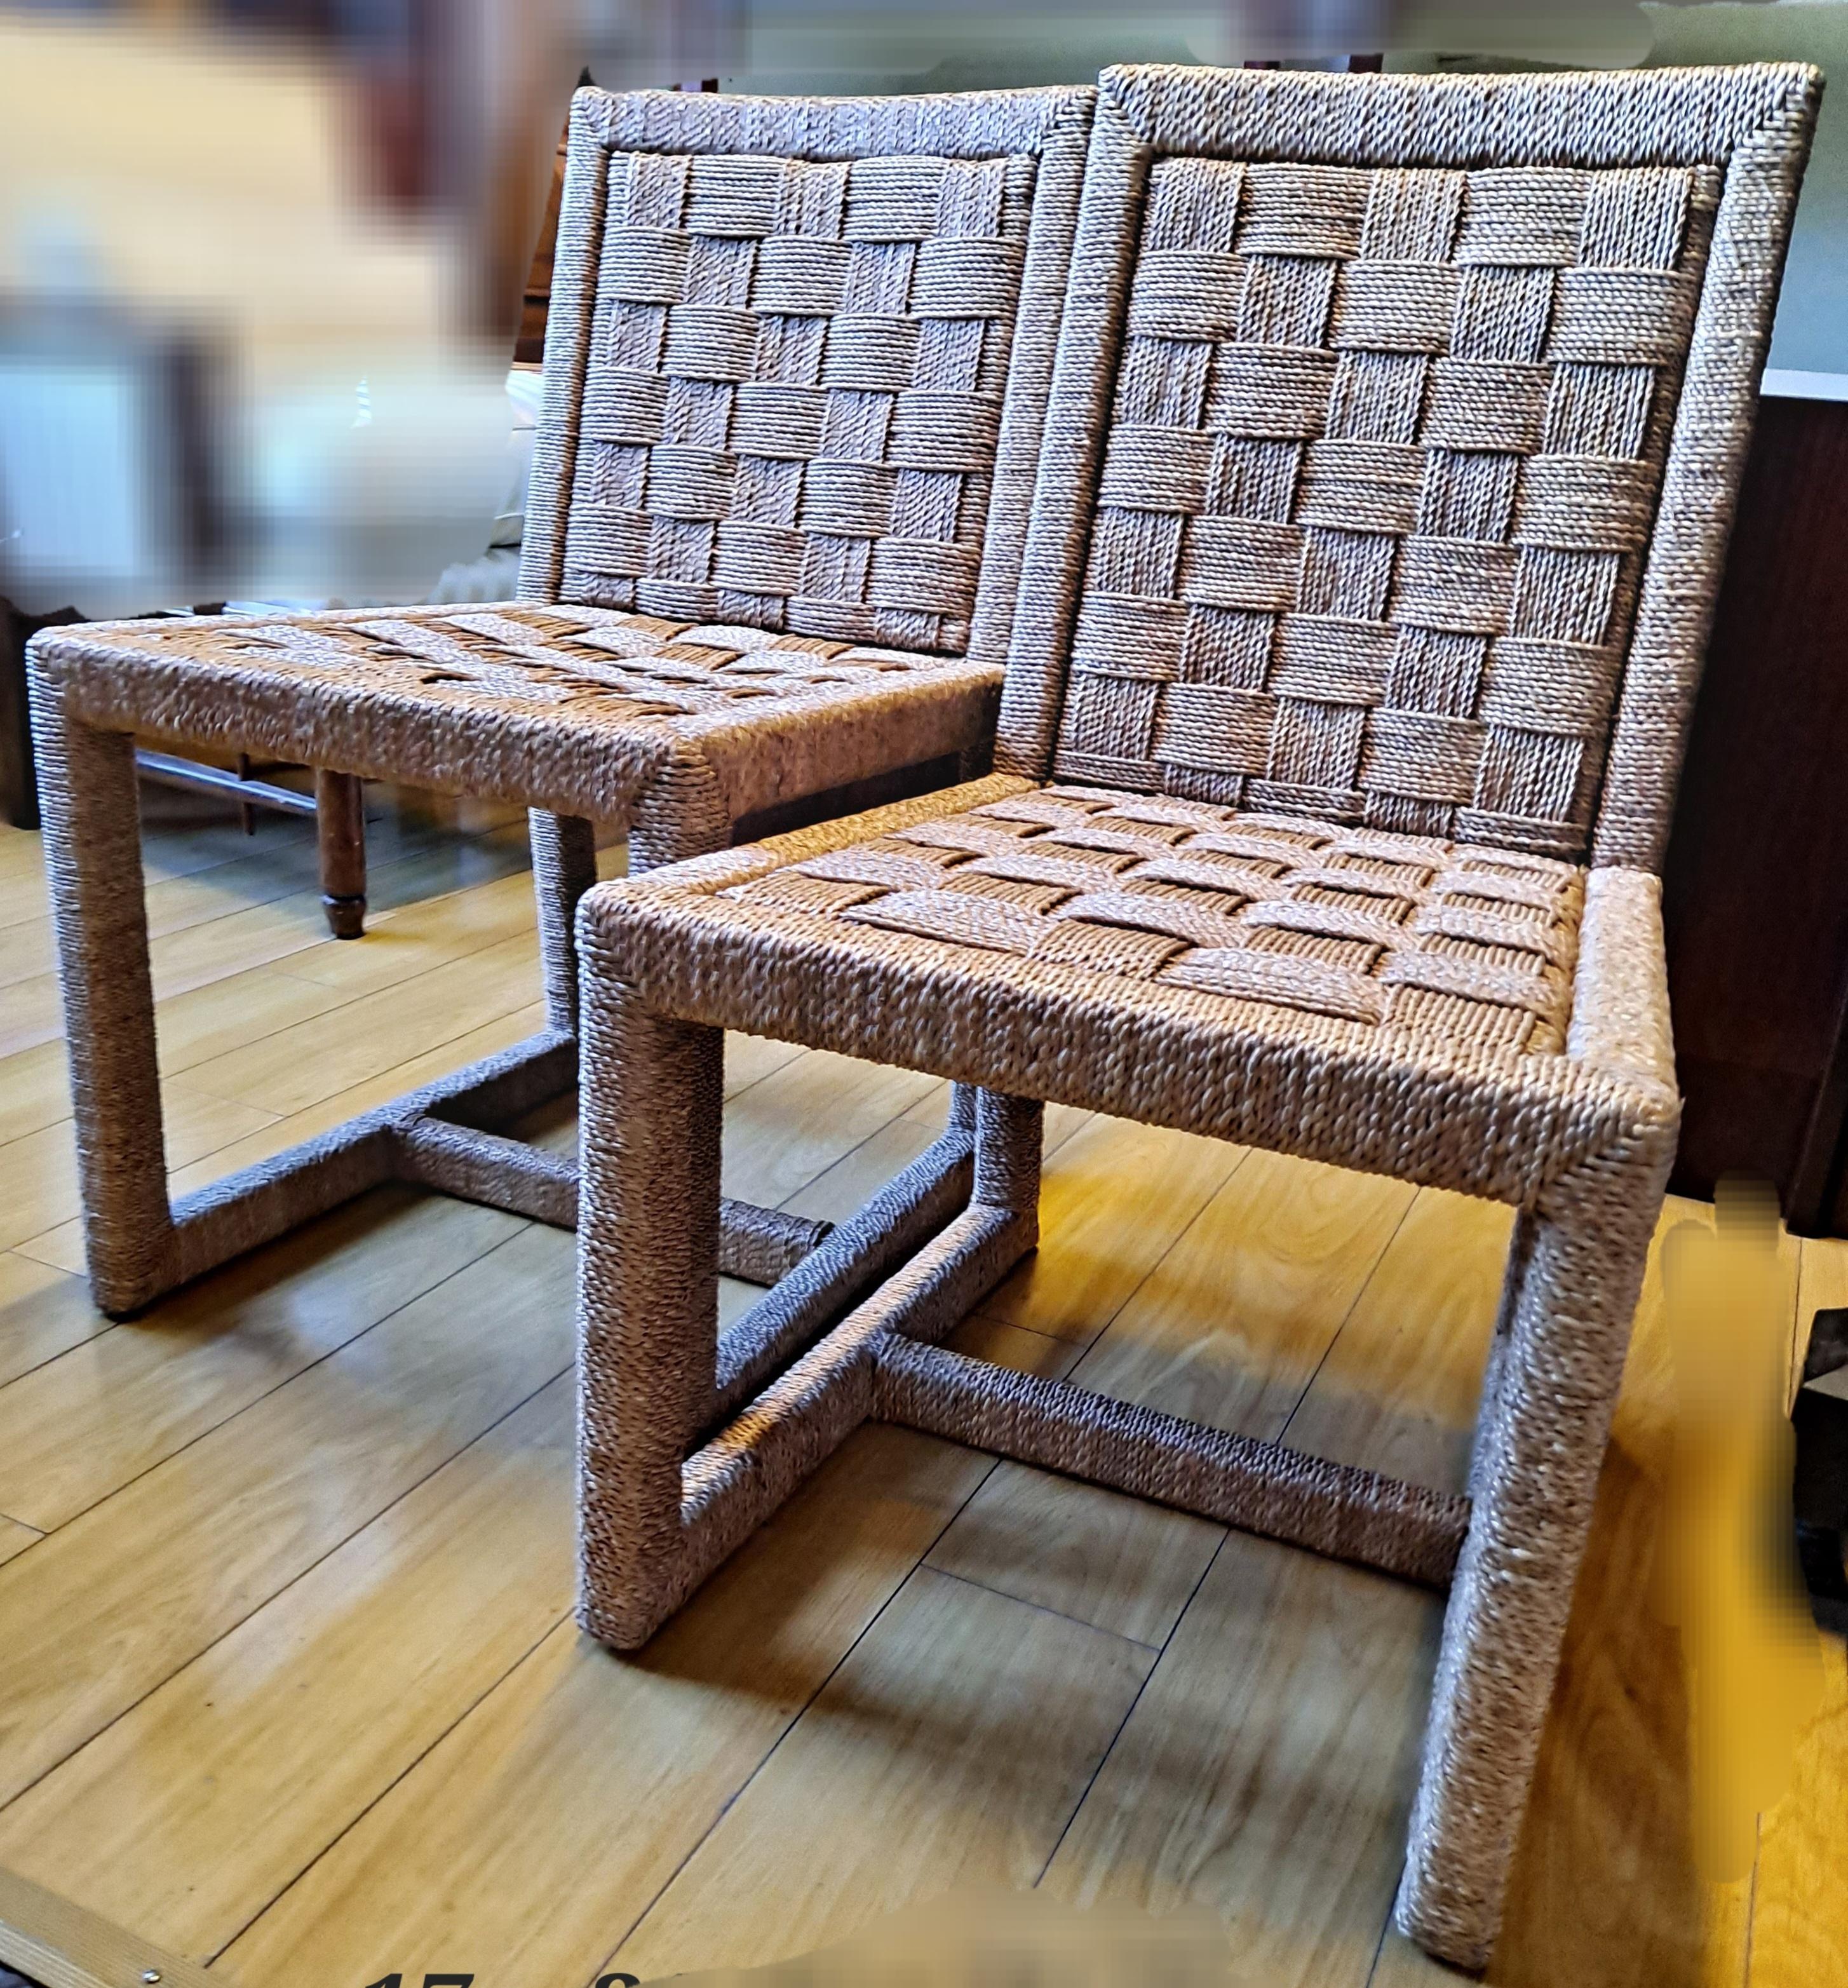 Pair of Contemporary Wraparound Woven Rattan Side Chairs

17